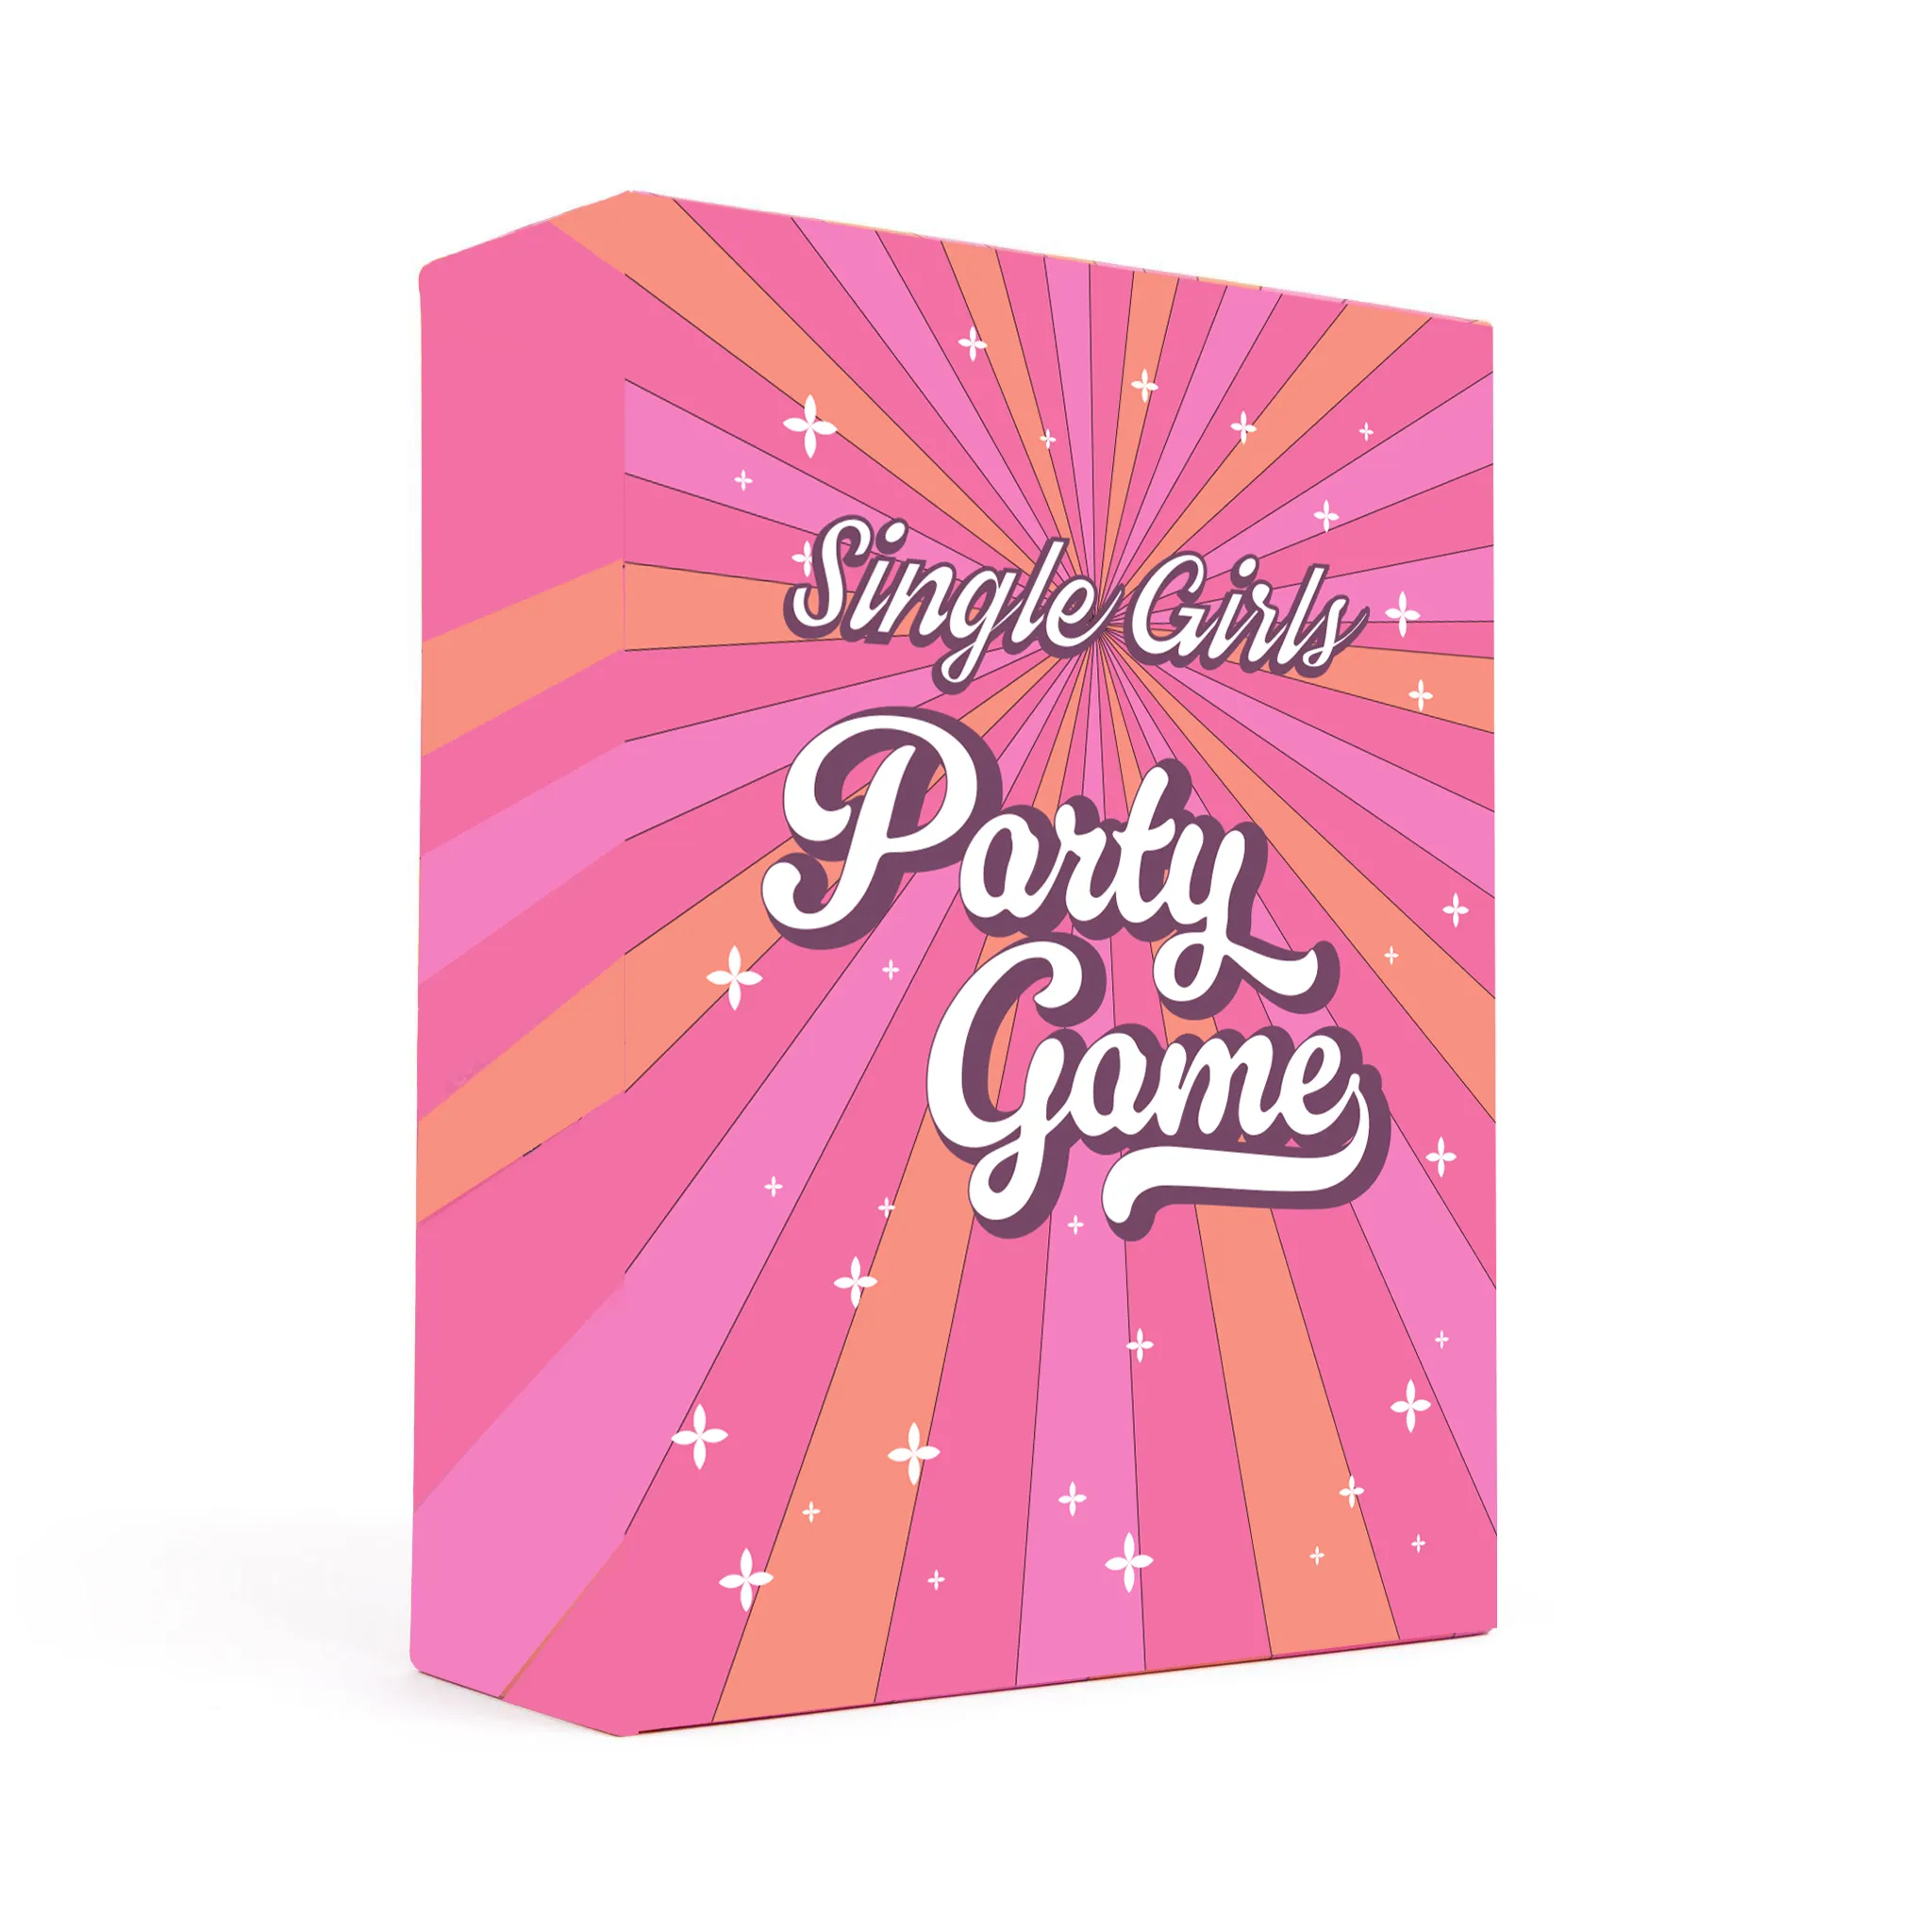 Custom Printing Service Card Game Front and Back Double Both Sides Drinking Playing Singer Girls Game Card For Adults Party